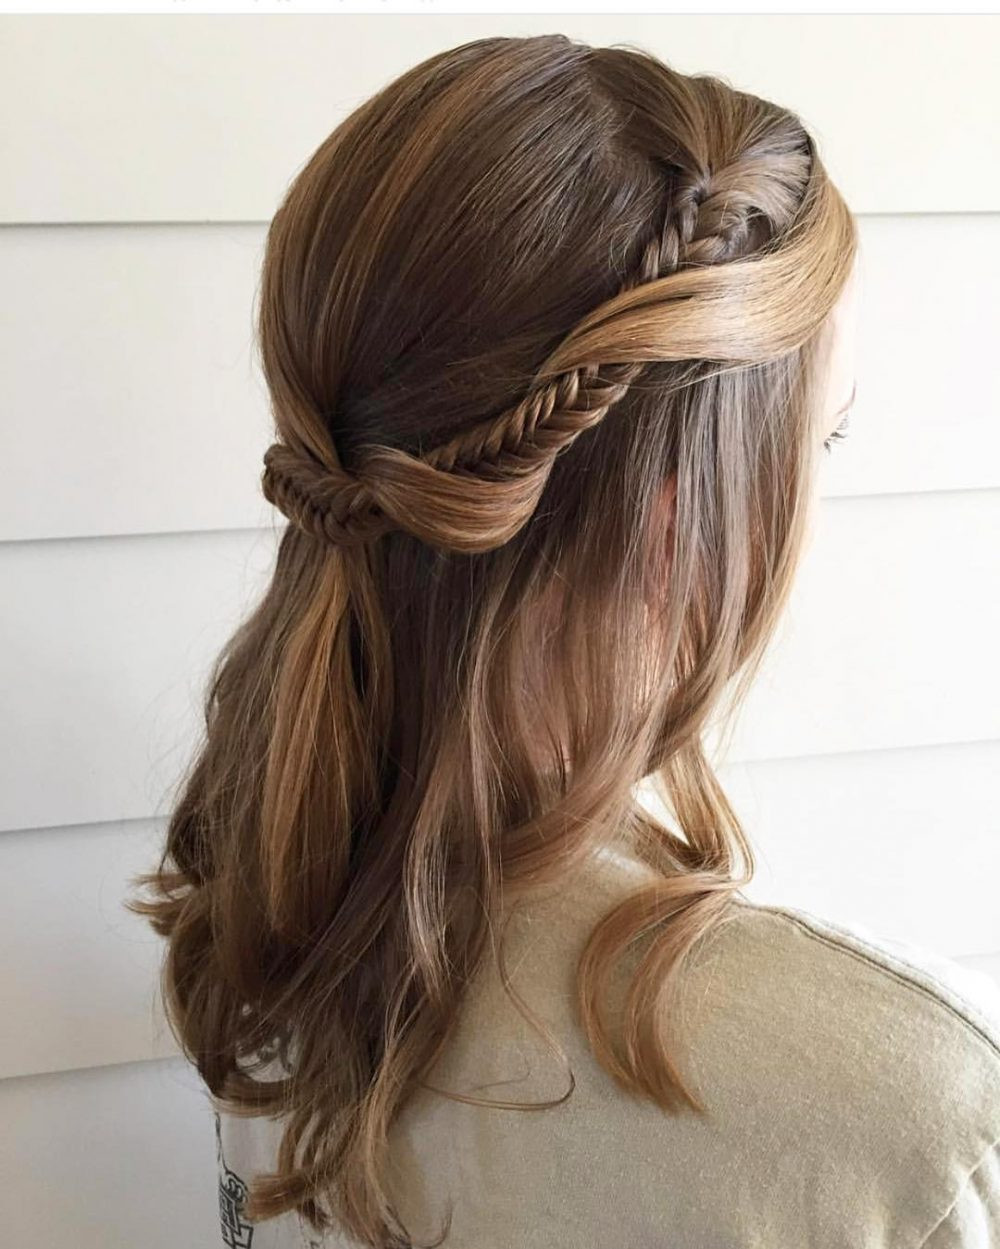 DIY Updo Hairstyles
 33 Ridiculously Easy DIY Chic Updos